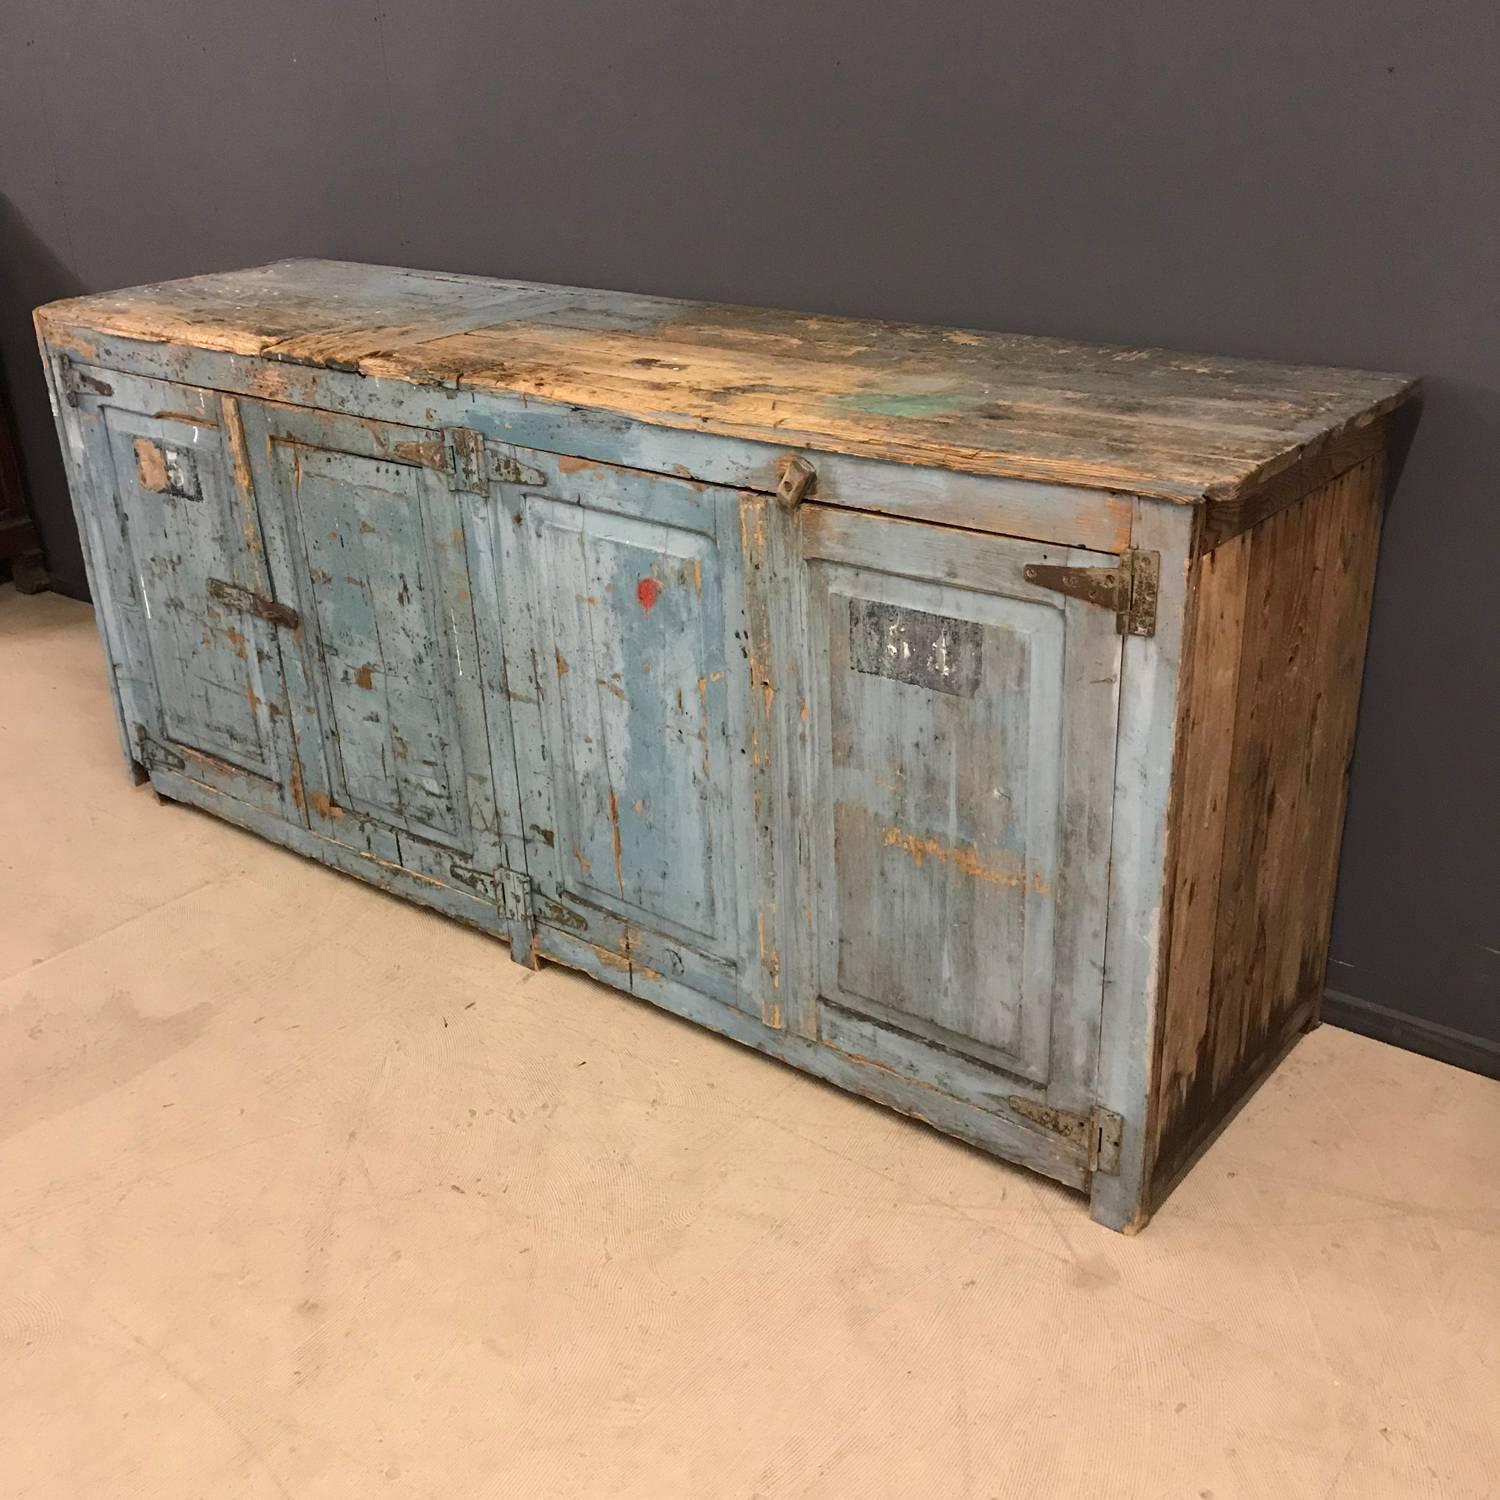 This Industrial workshop cabinet was used as a workbench and for storage in a factory in France. It was made in France during the early 20th century. It has big wrought iron hinges and multiple layers of old paint. Has been cleaned and can now be